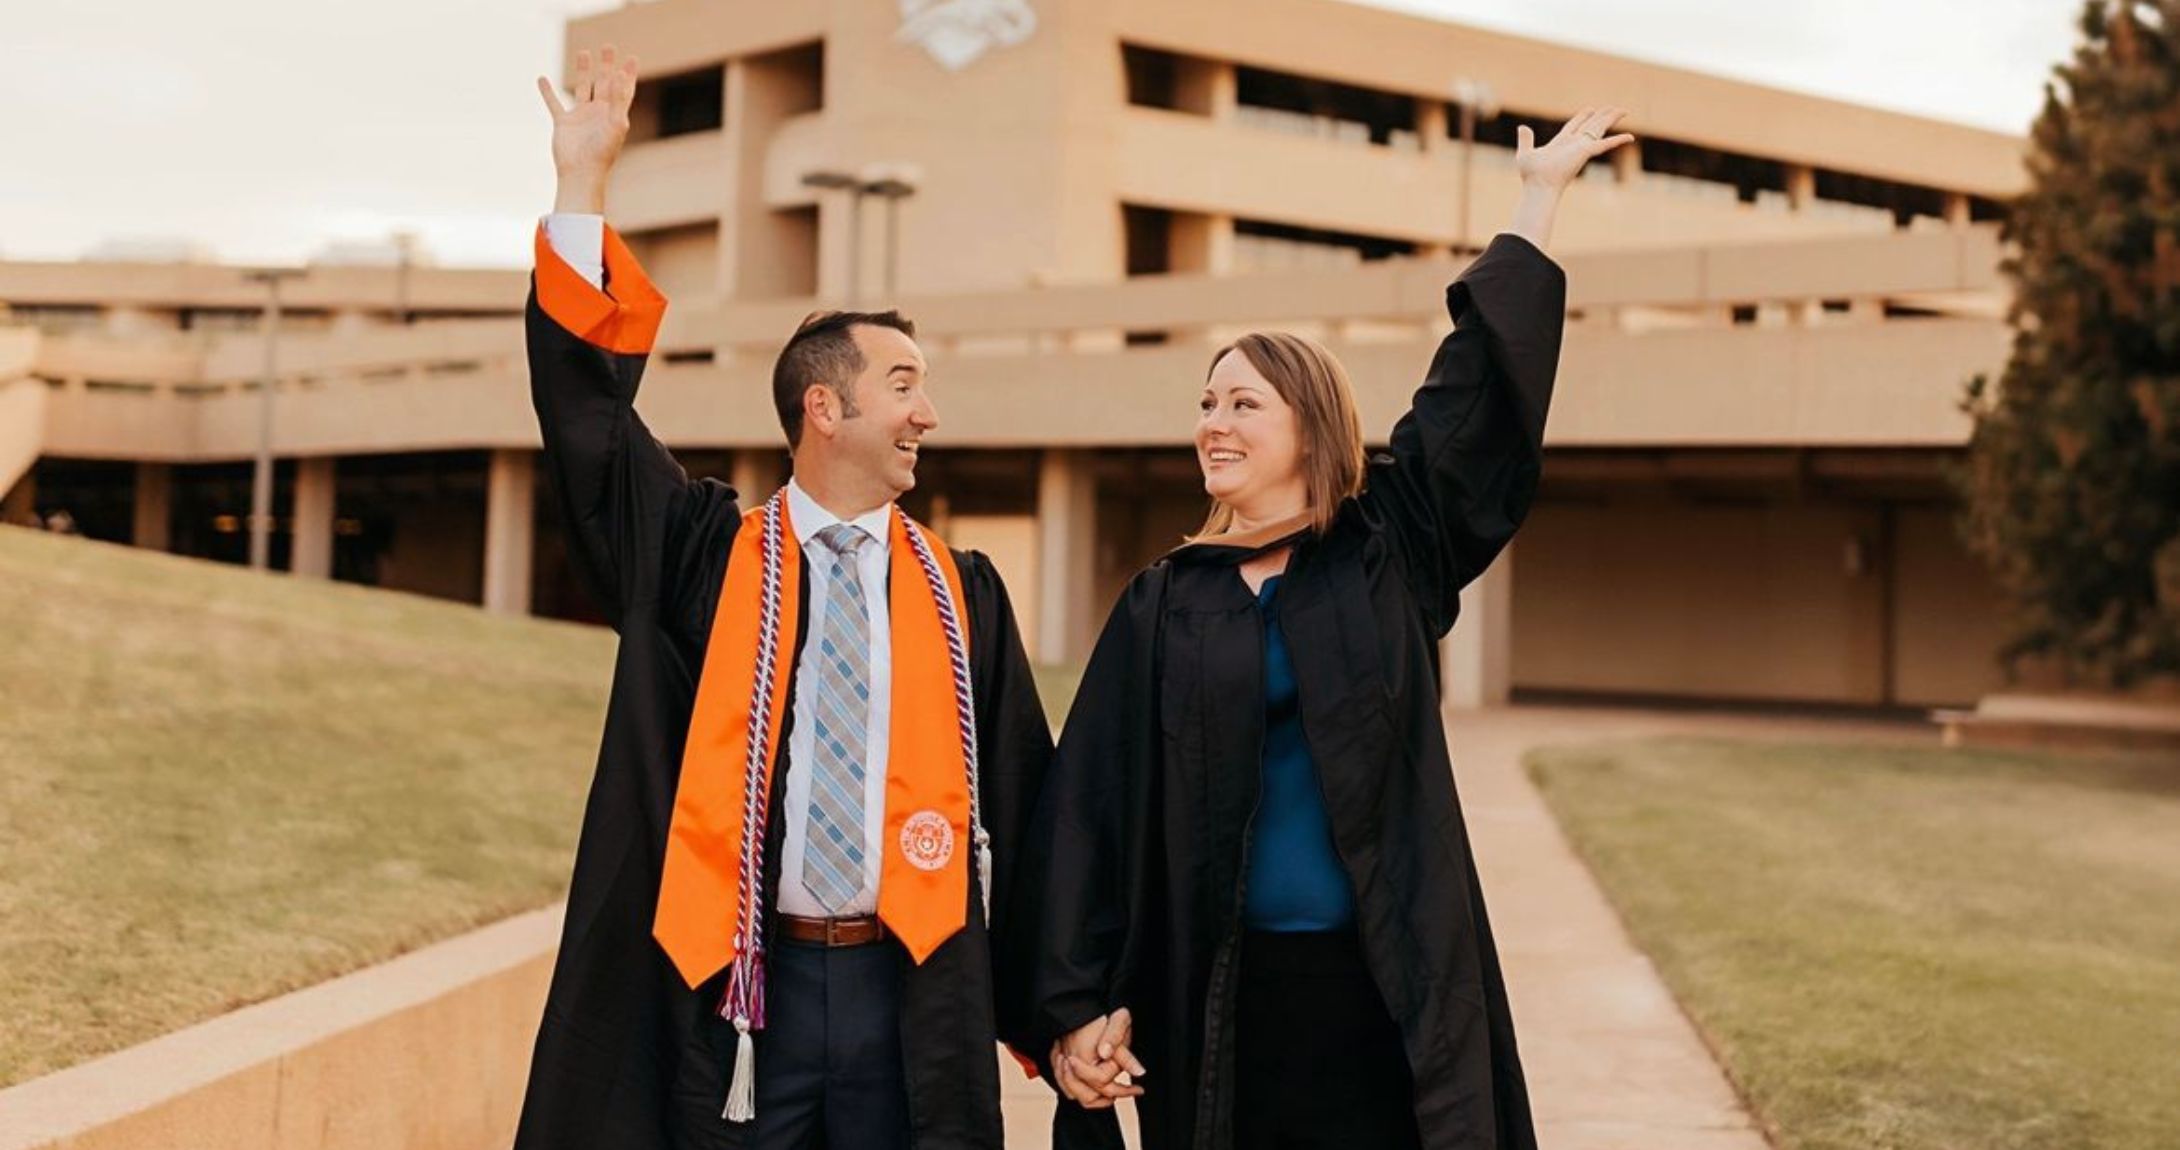 Two grads throwing caps in the air